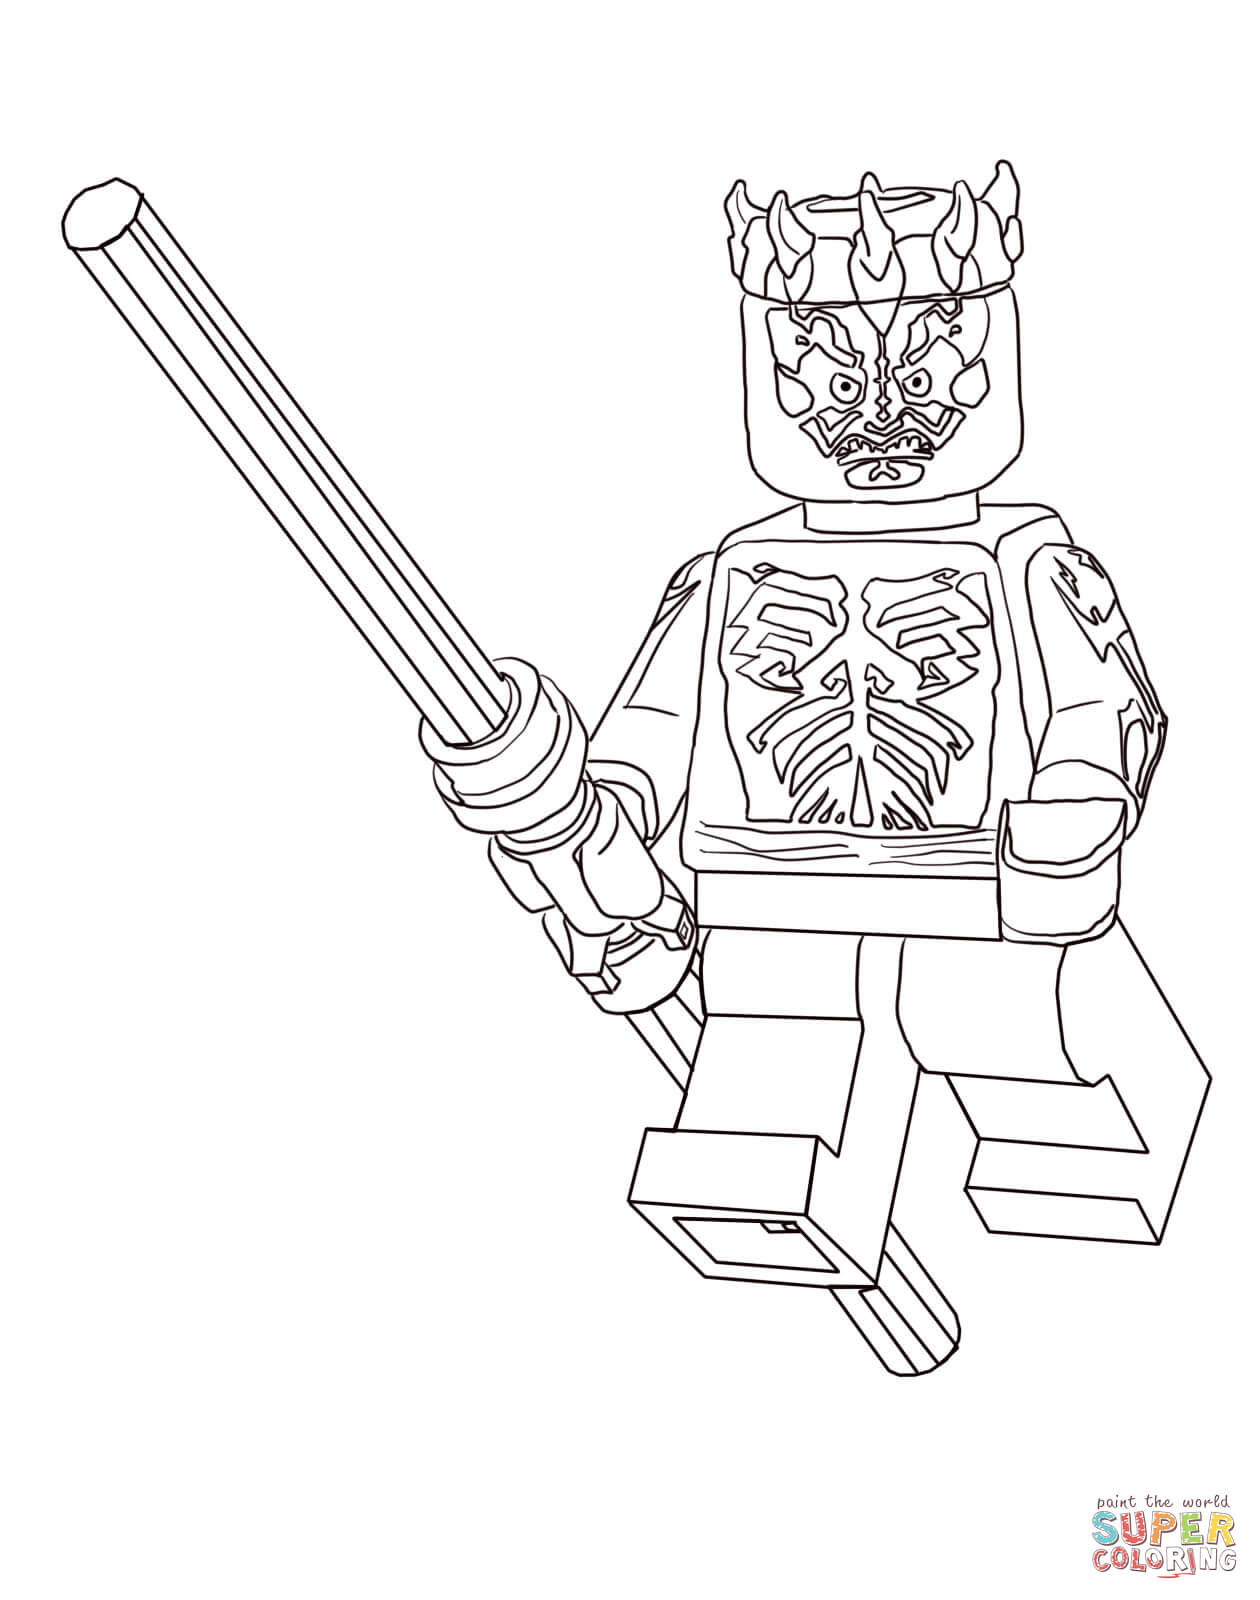 Lego Coloring Pages Star Wars Lego Star Wars Coloring Pages Free Coloring Pages